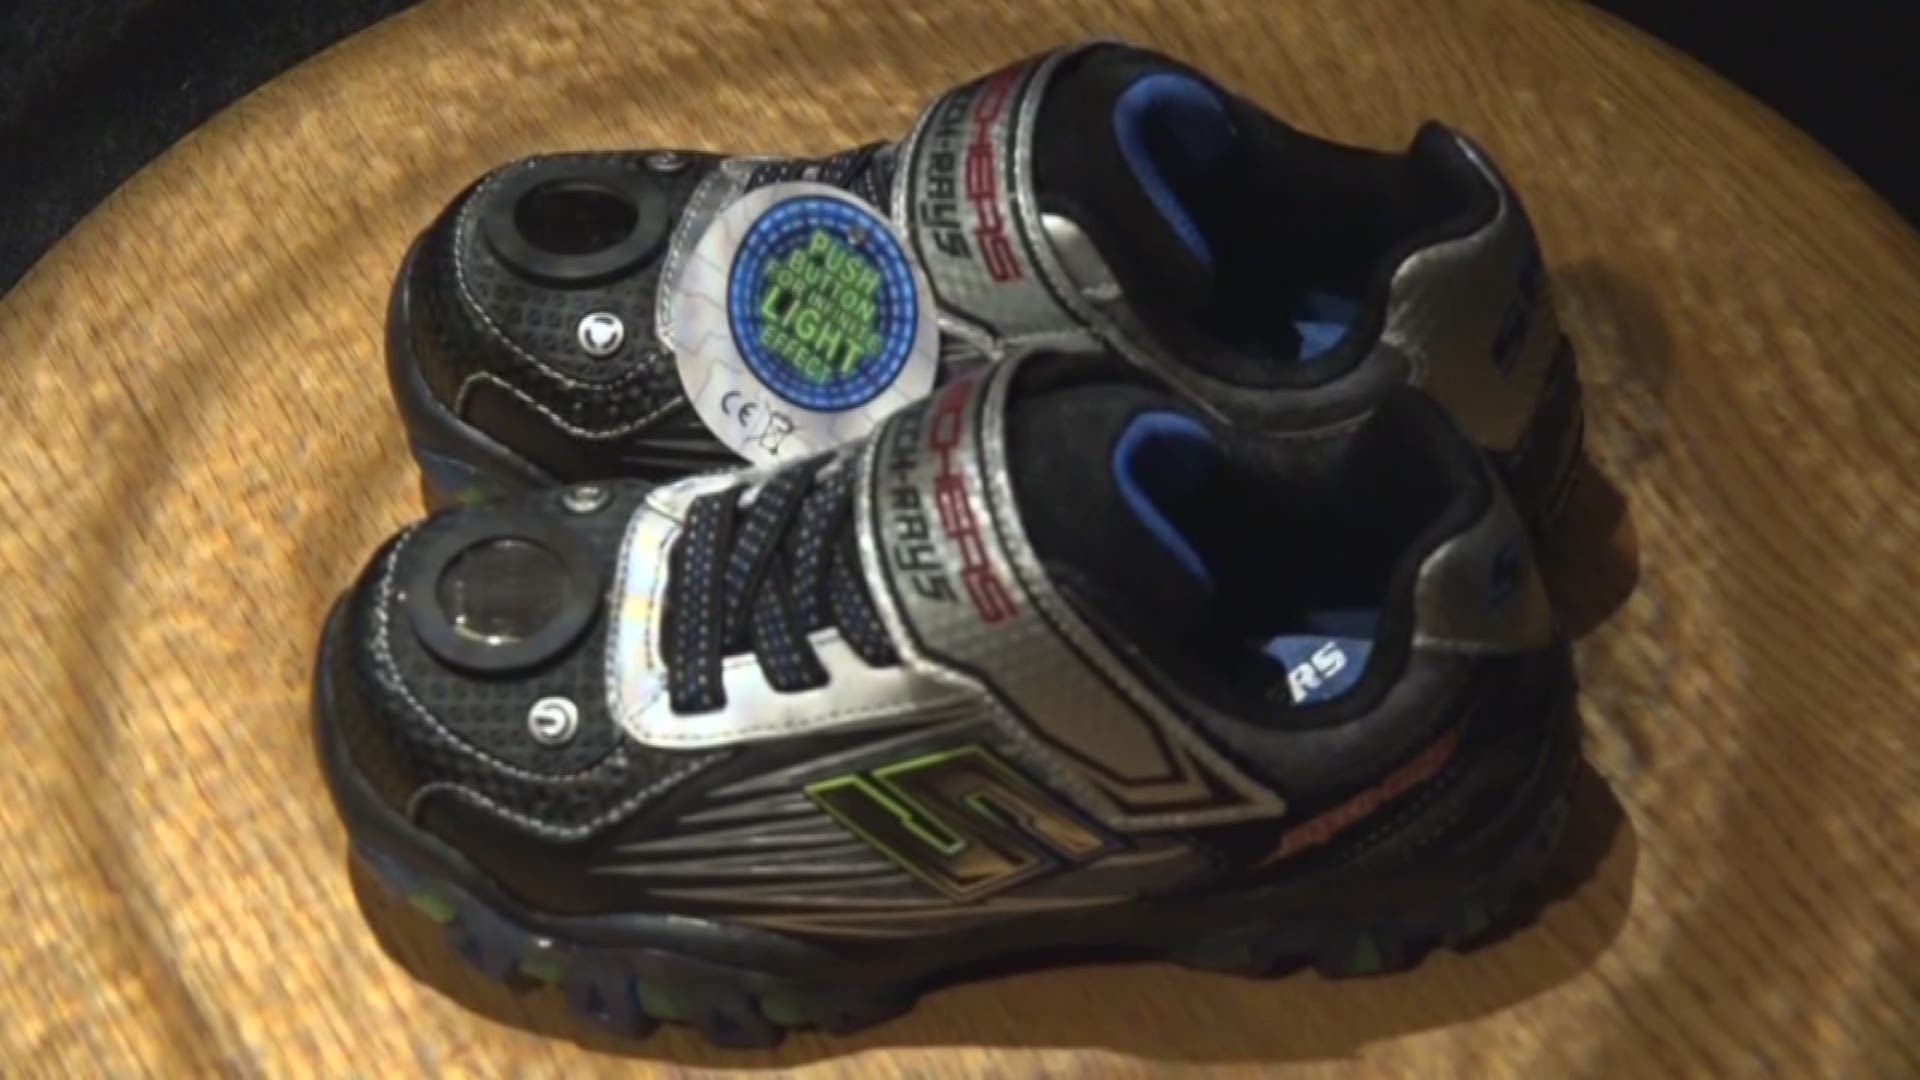 Parents outraged over shoe design while 